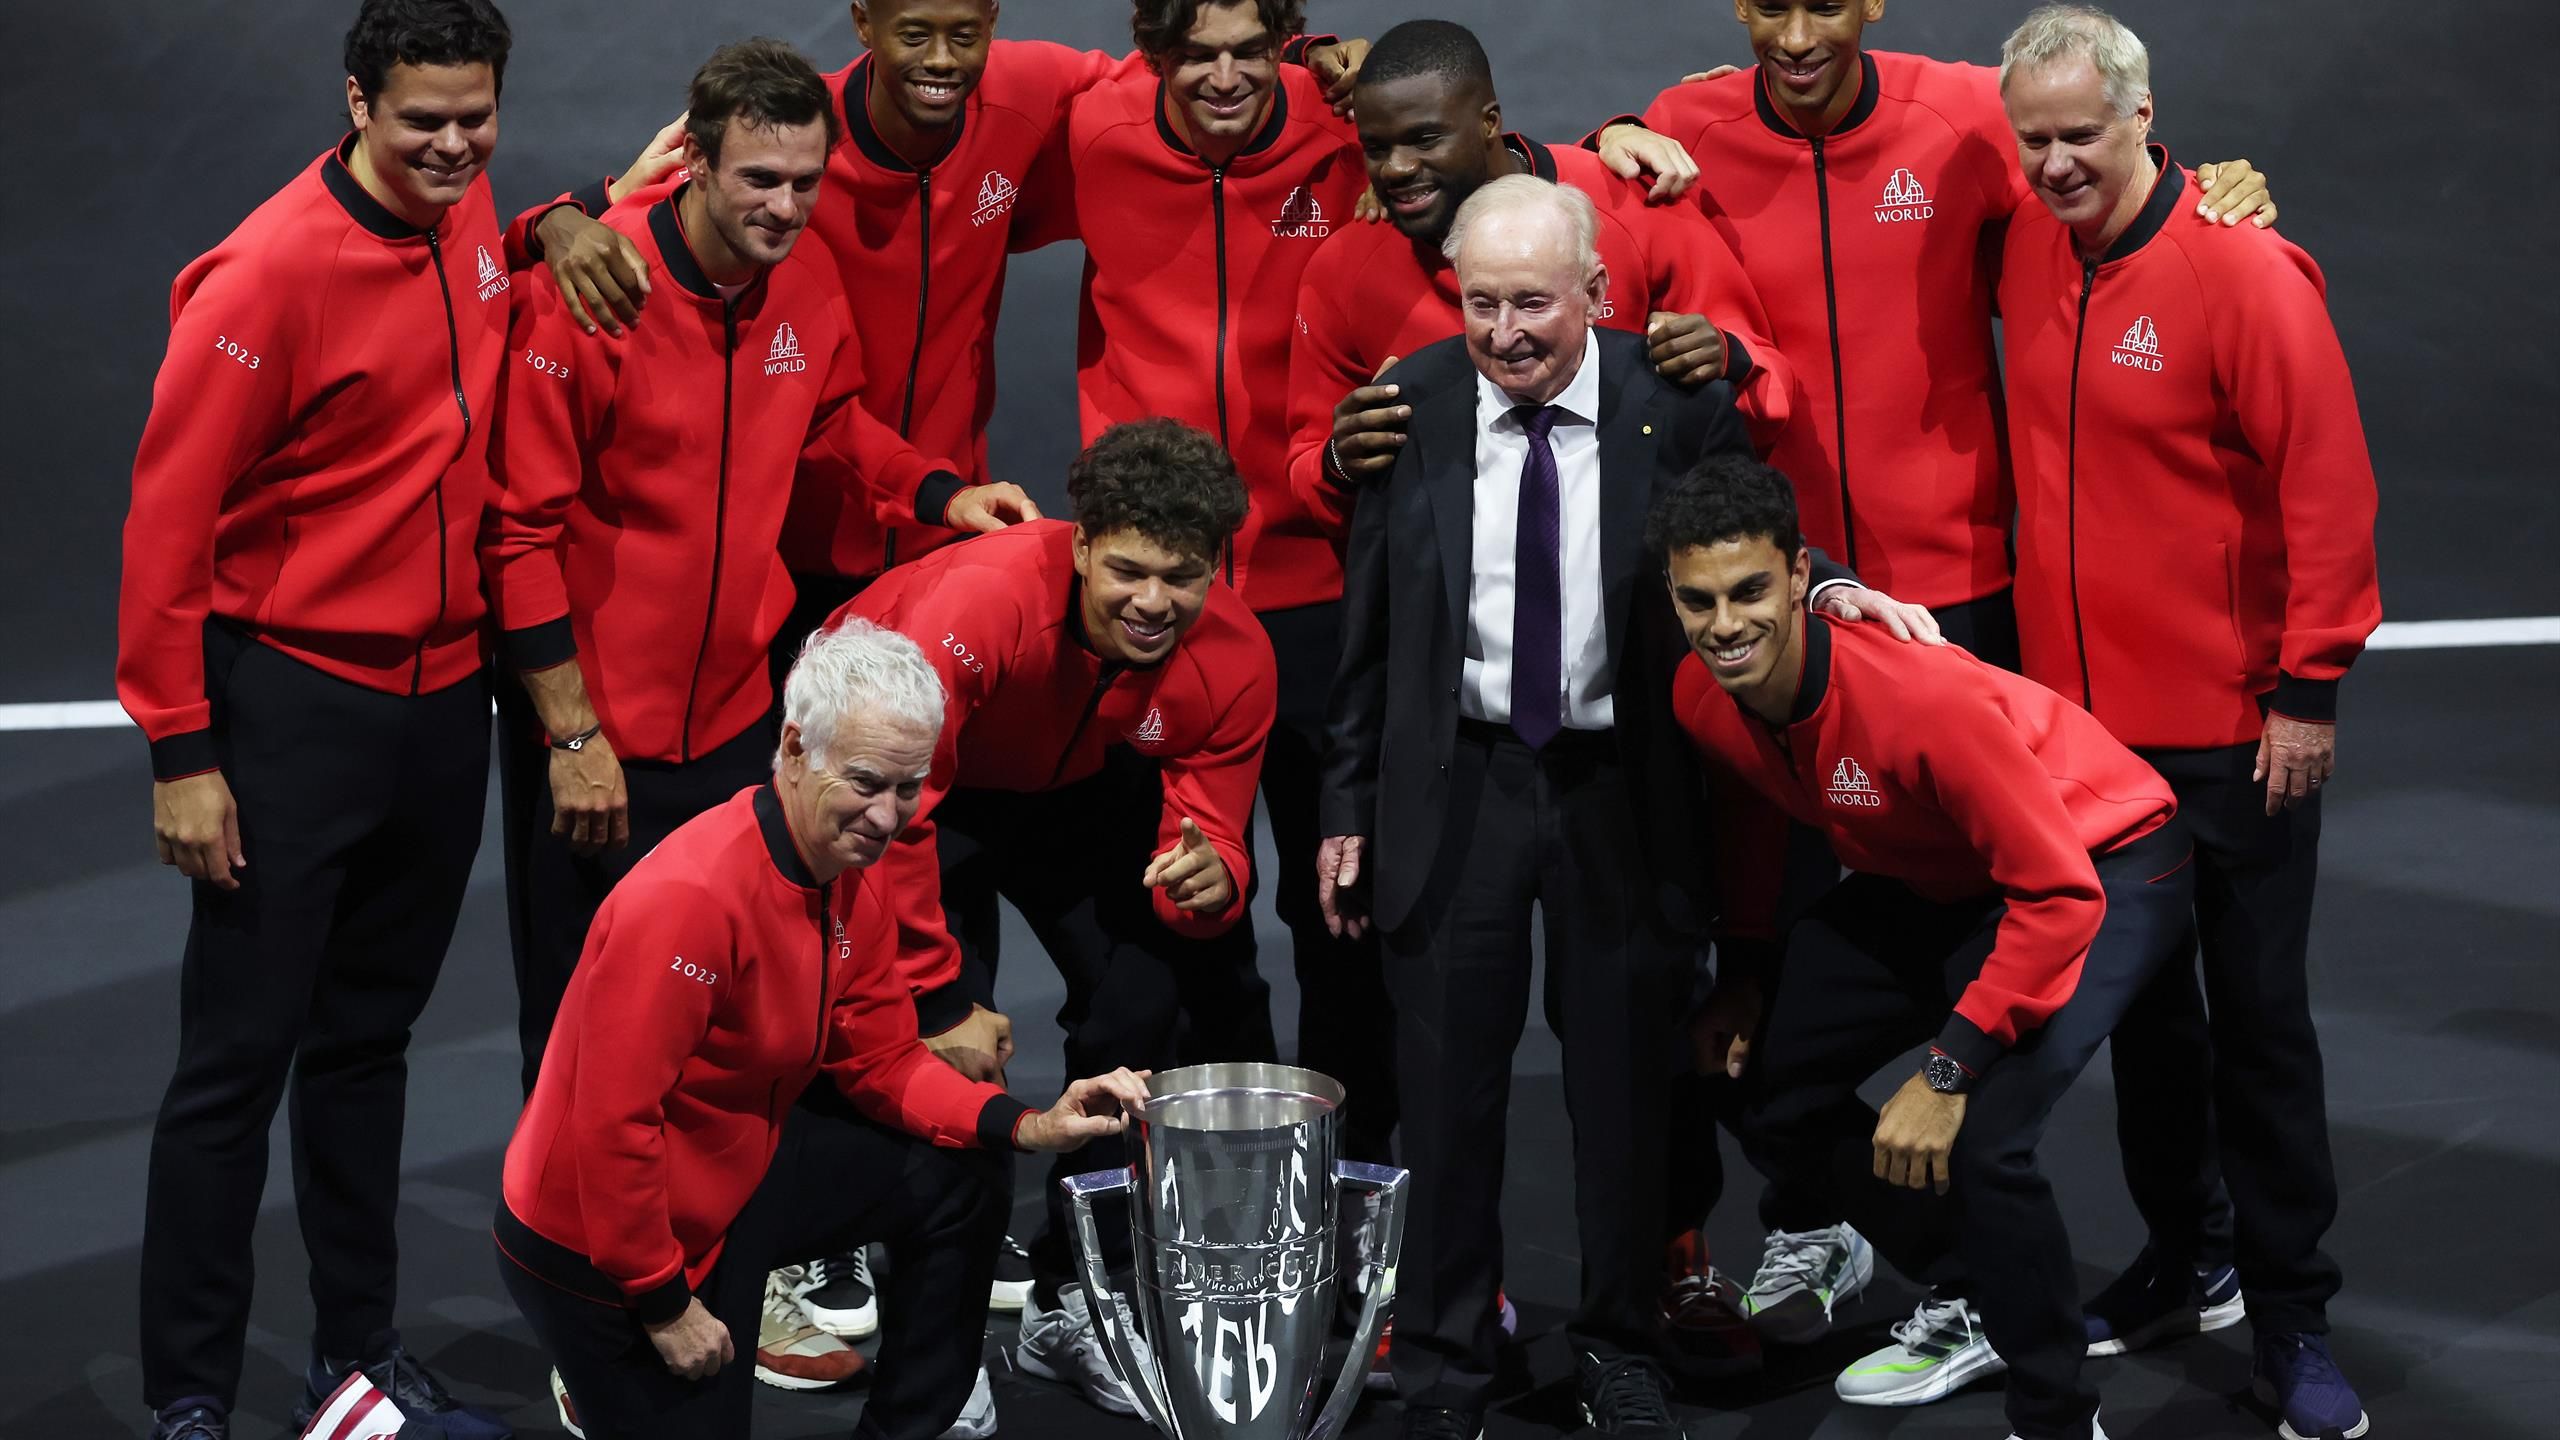 Laver Cup 2023 Team World complete Team Europe demolition to defend title in Canada